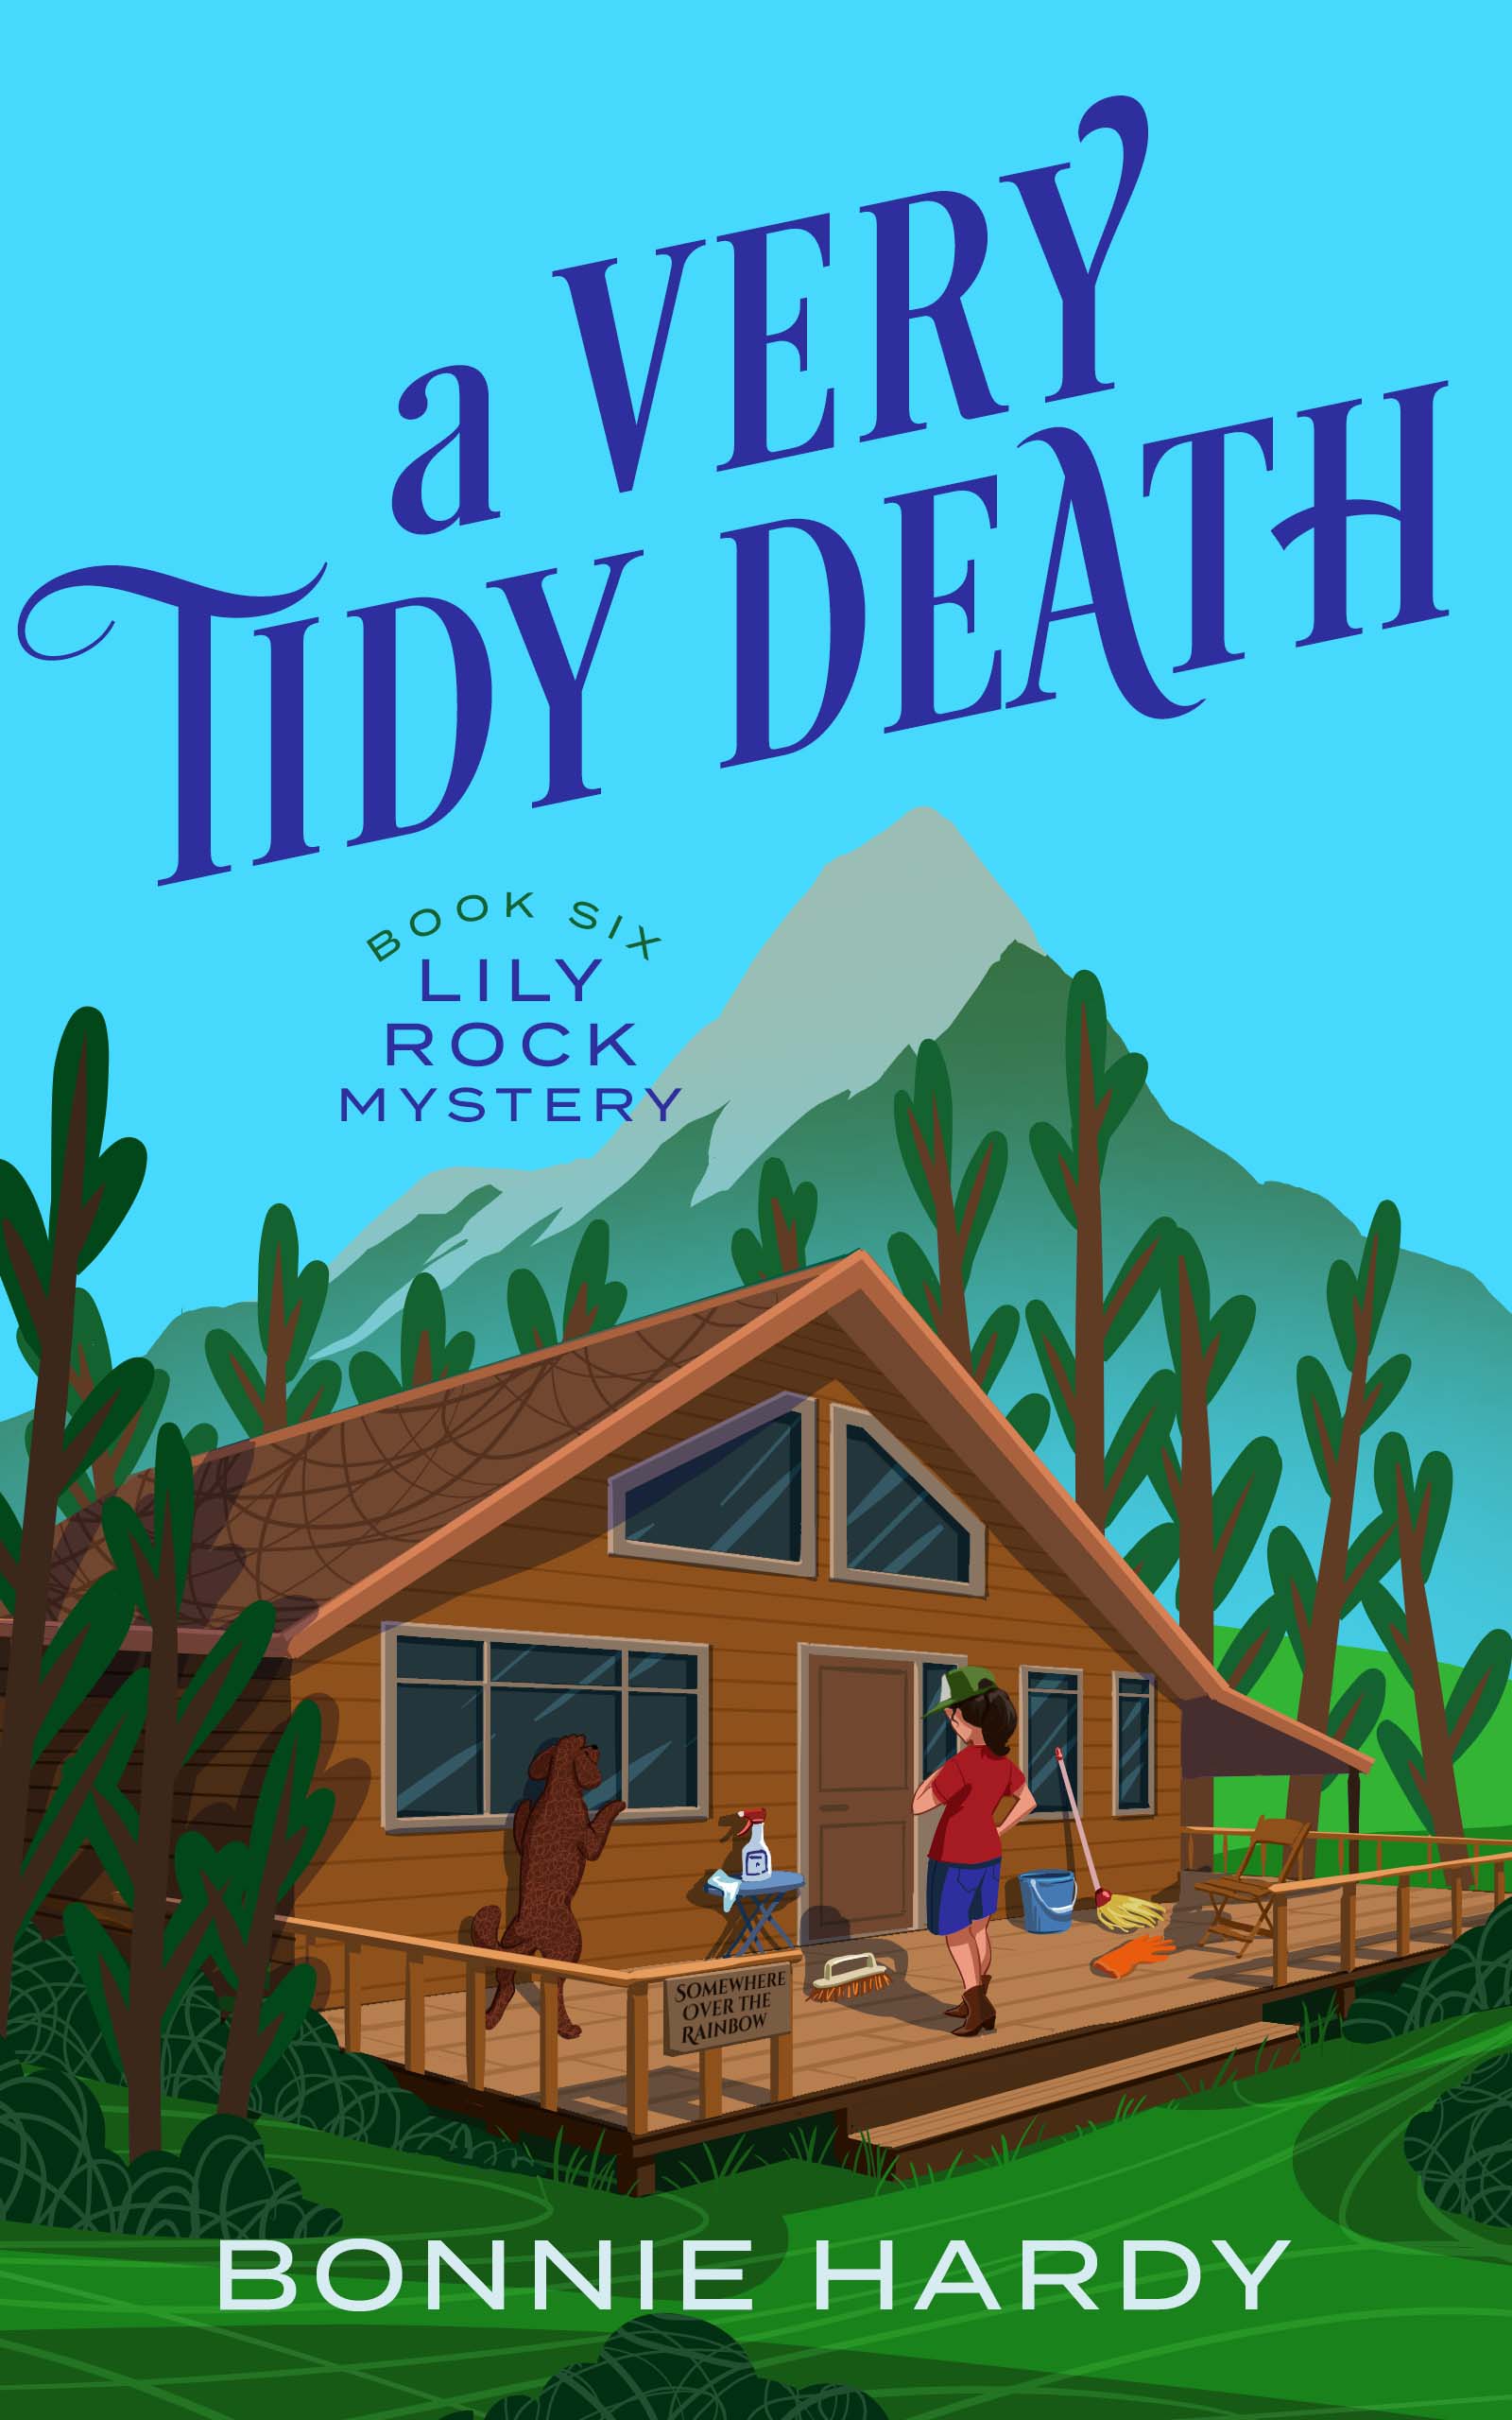 A Very Tidy Death